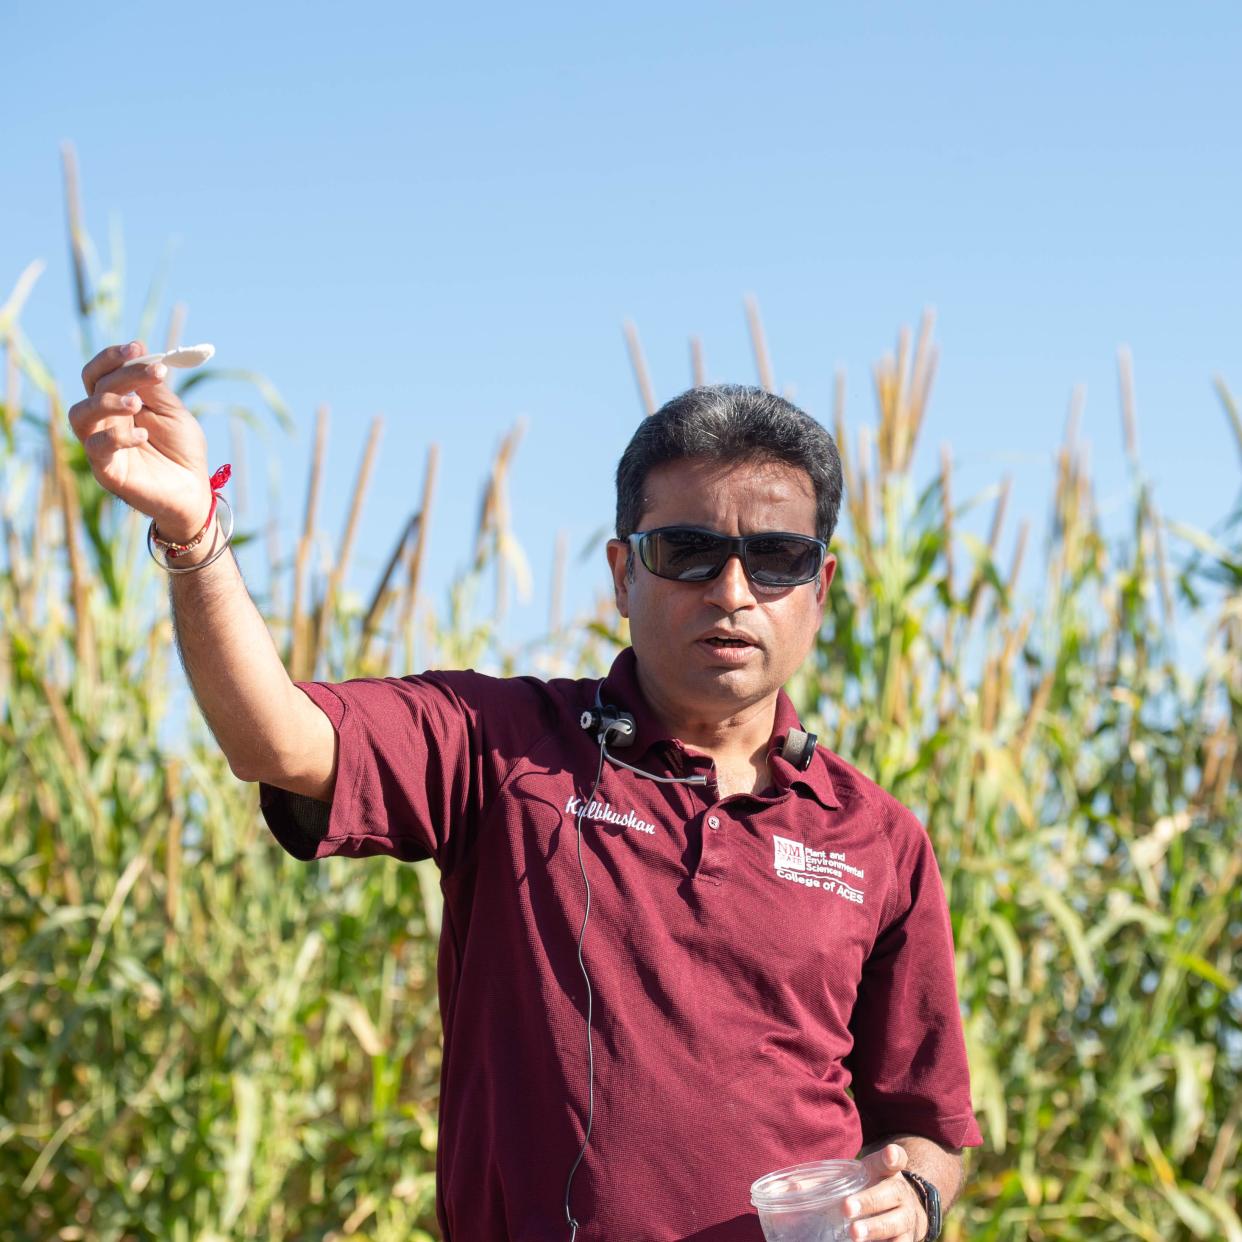 Kulbhushan Grover, a researcher in New Mexico State University’s College of Agricultural, Consumer and Environmental Sciences, gives a presentation at NMSU’s Fabián García Science Center in September 2021. Grover’s research findings show guar can be successfully adapted to grow in semi-arid desert regions like New Mexico because of its ability to tolerate heat and water stress.